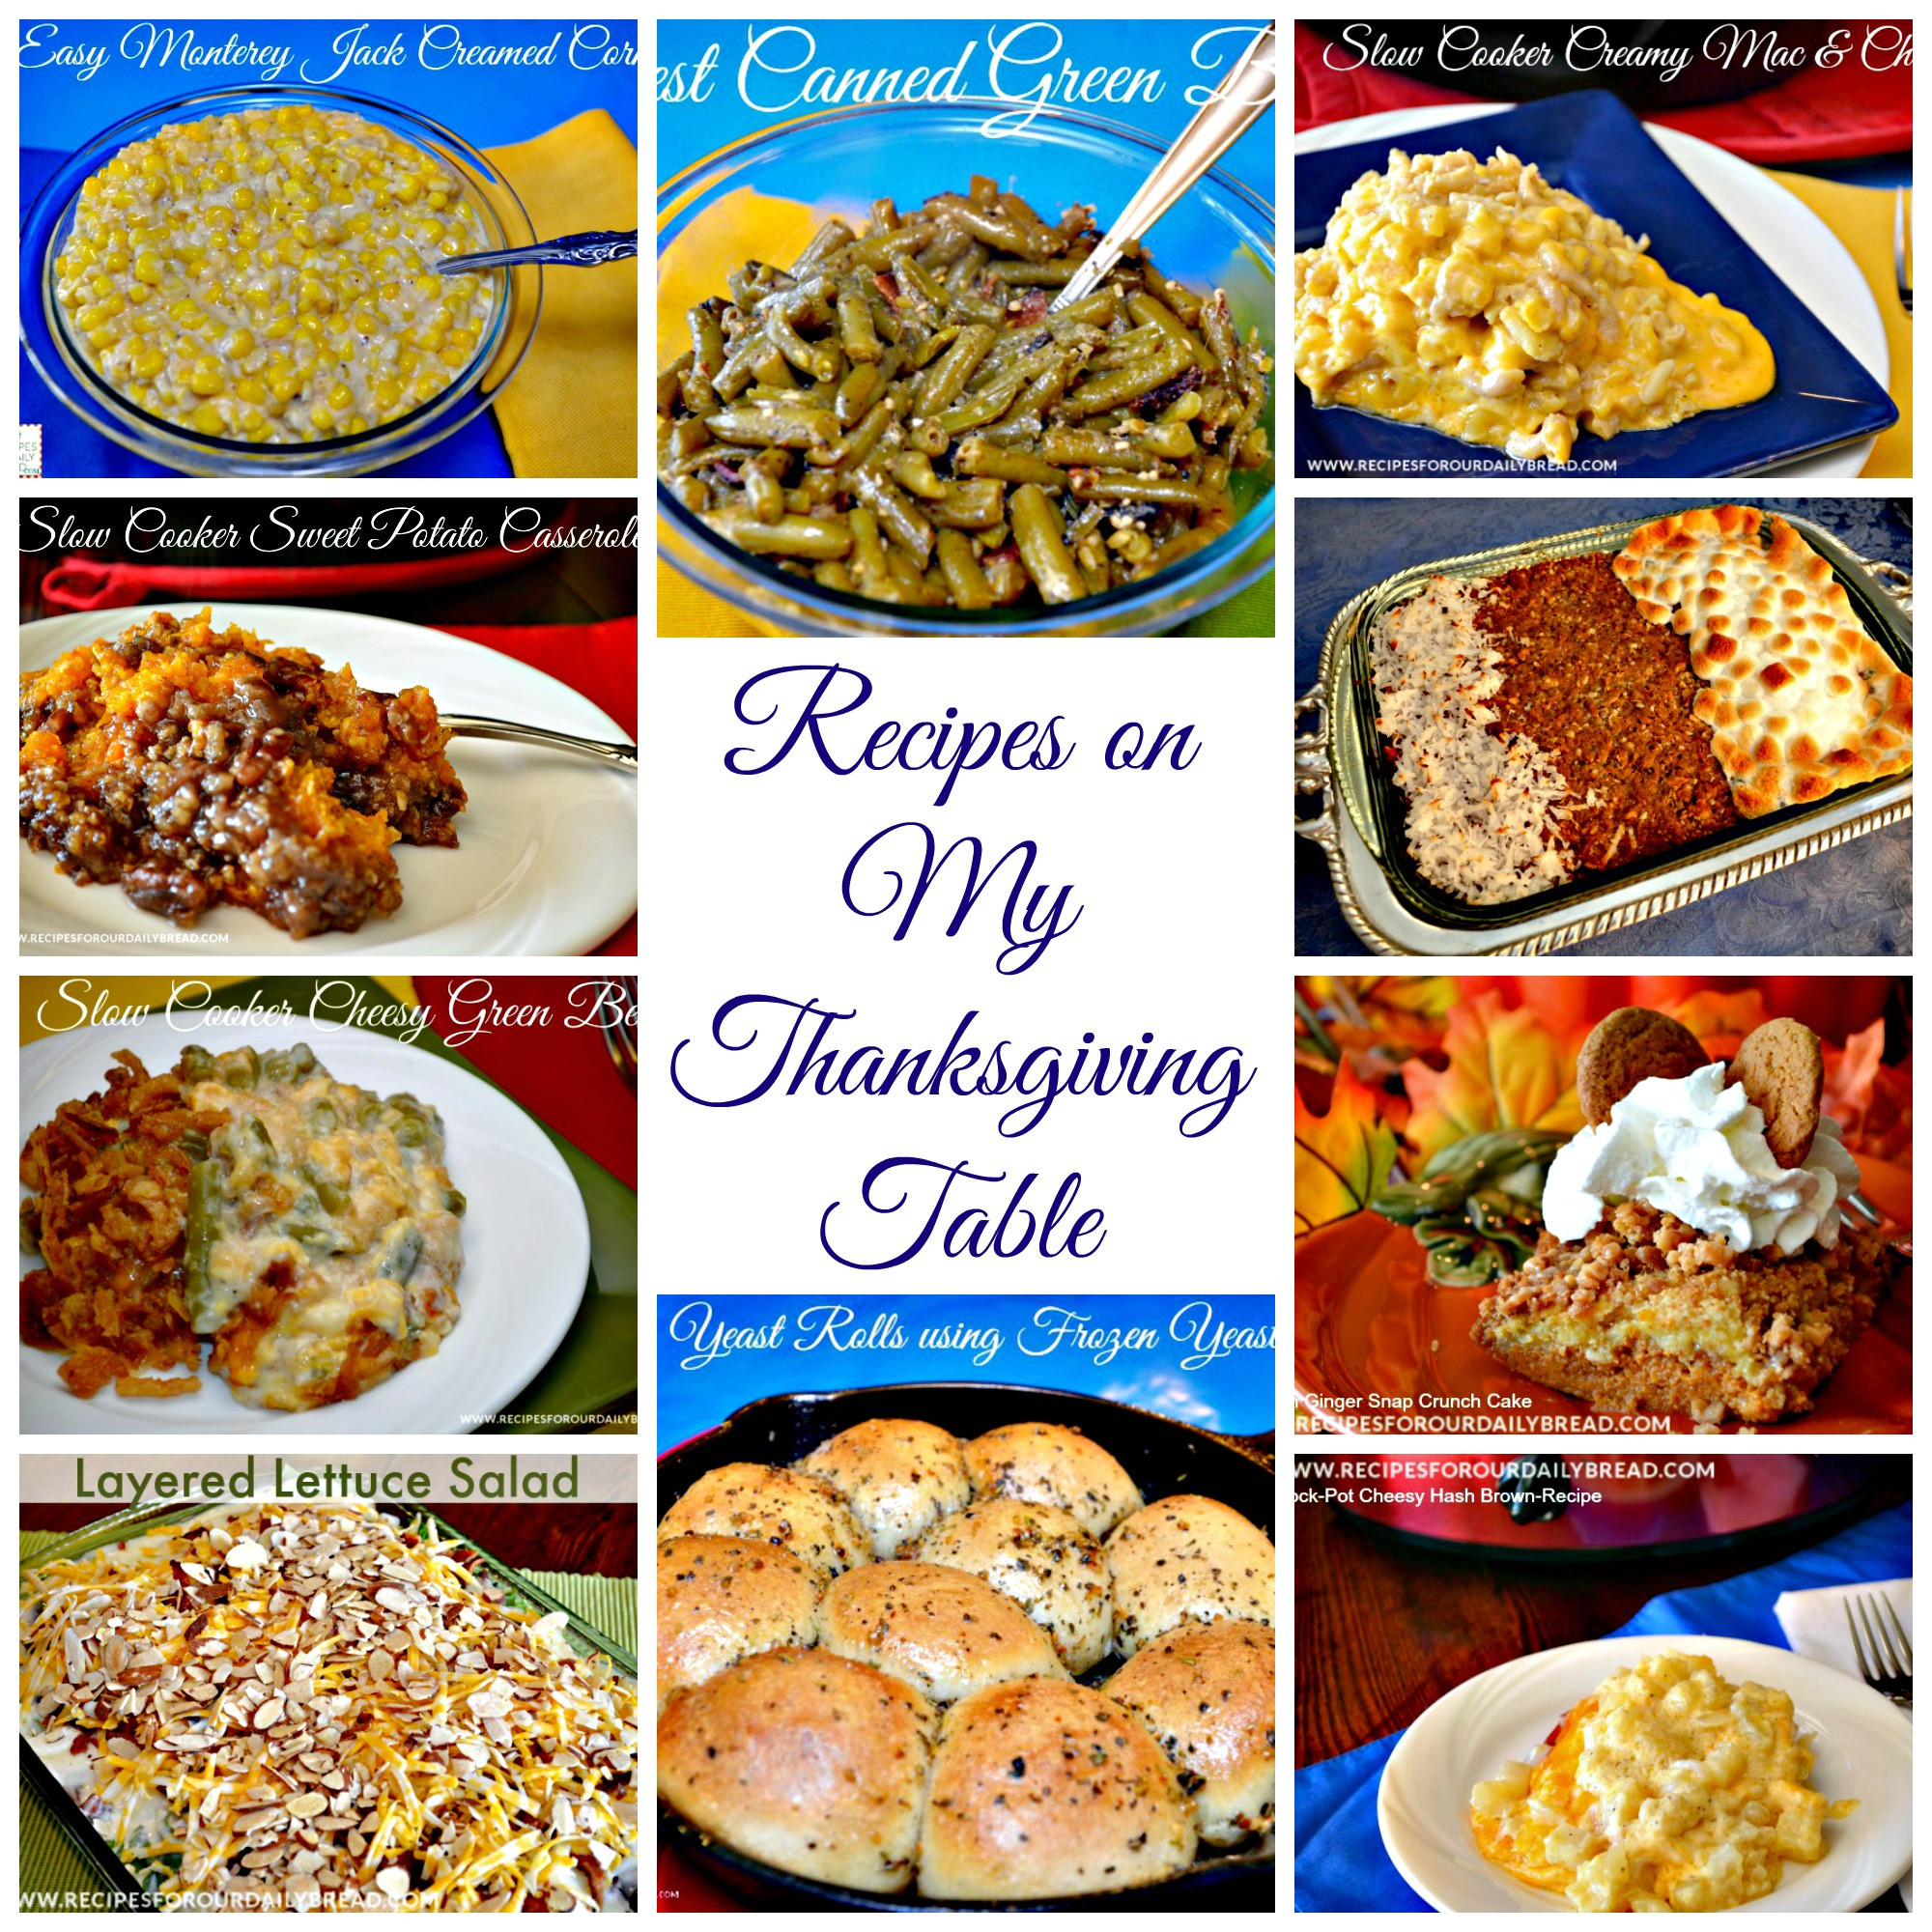 Thanksgiving Side Dishes Recipes
 HOW TO MAKE 16 DELICIOUS THANKSGIVING SIDE DISHES